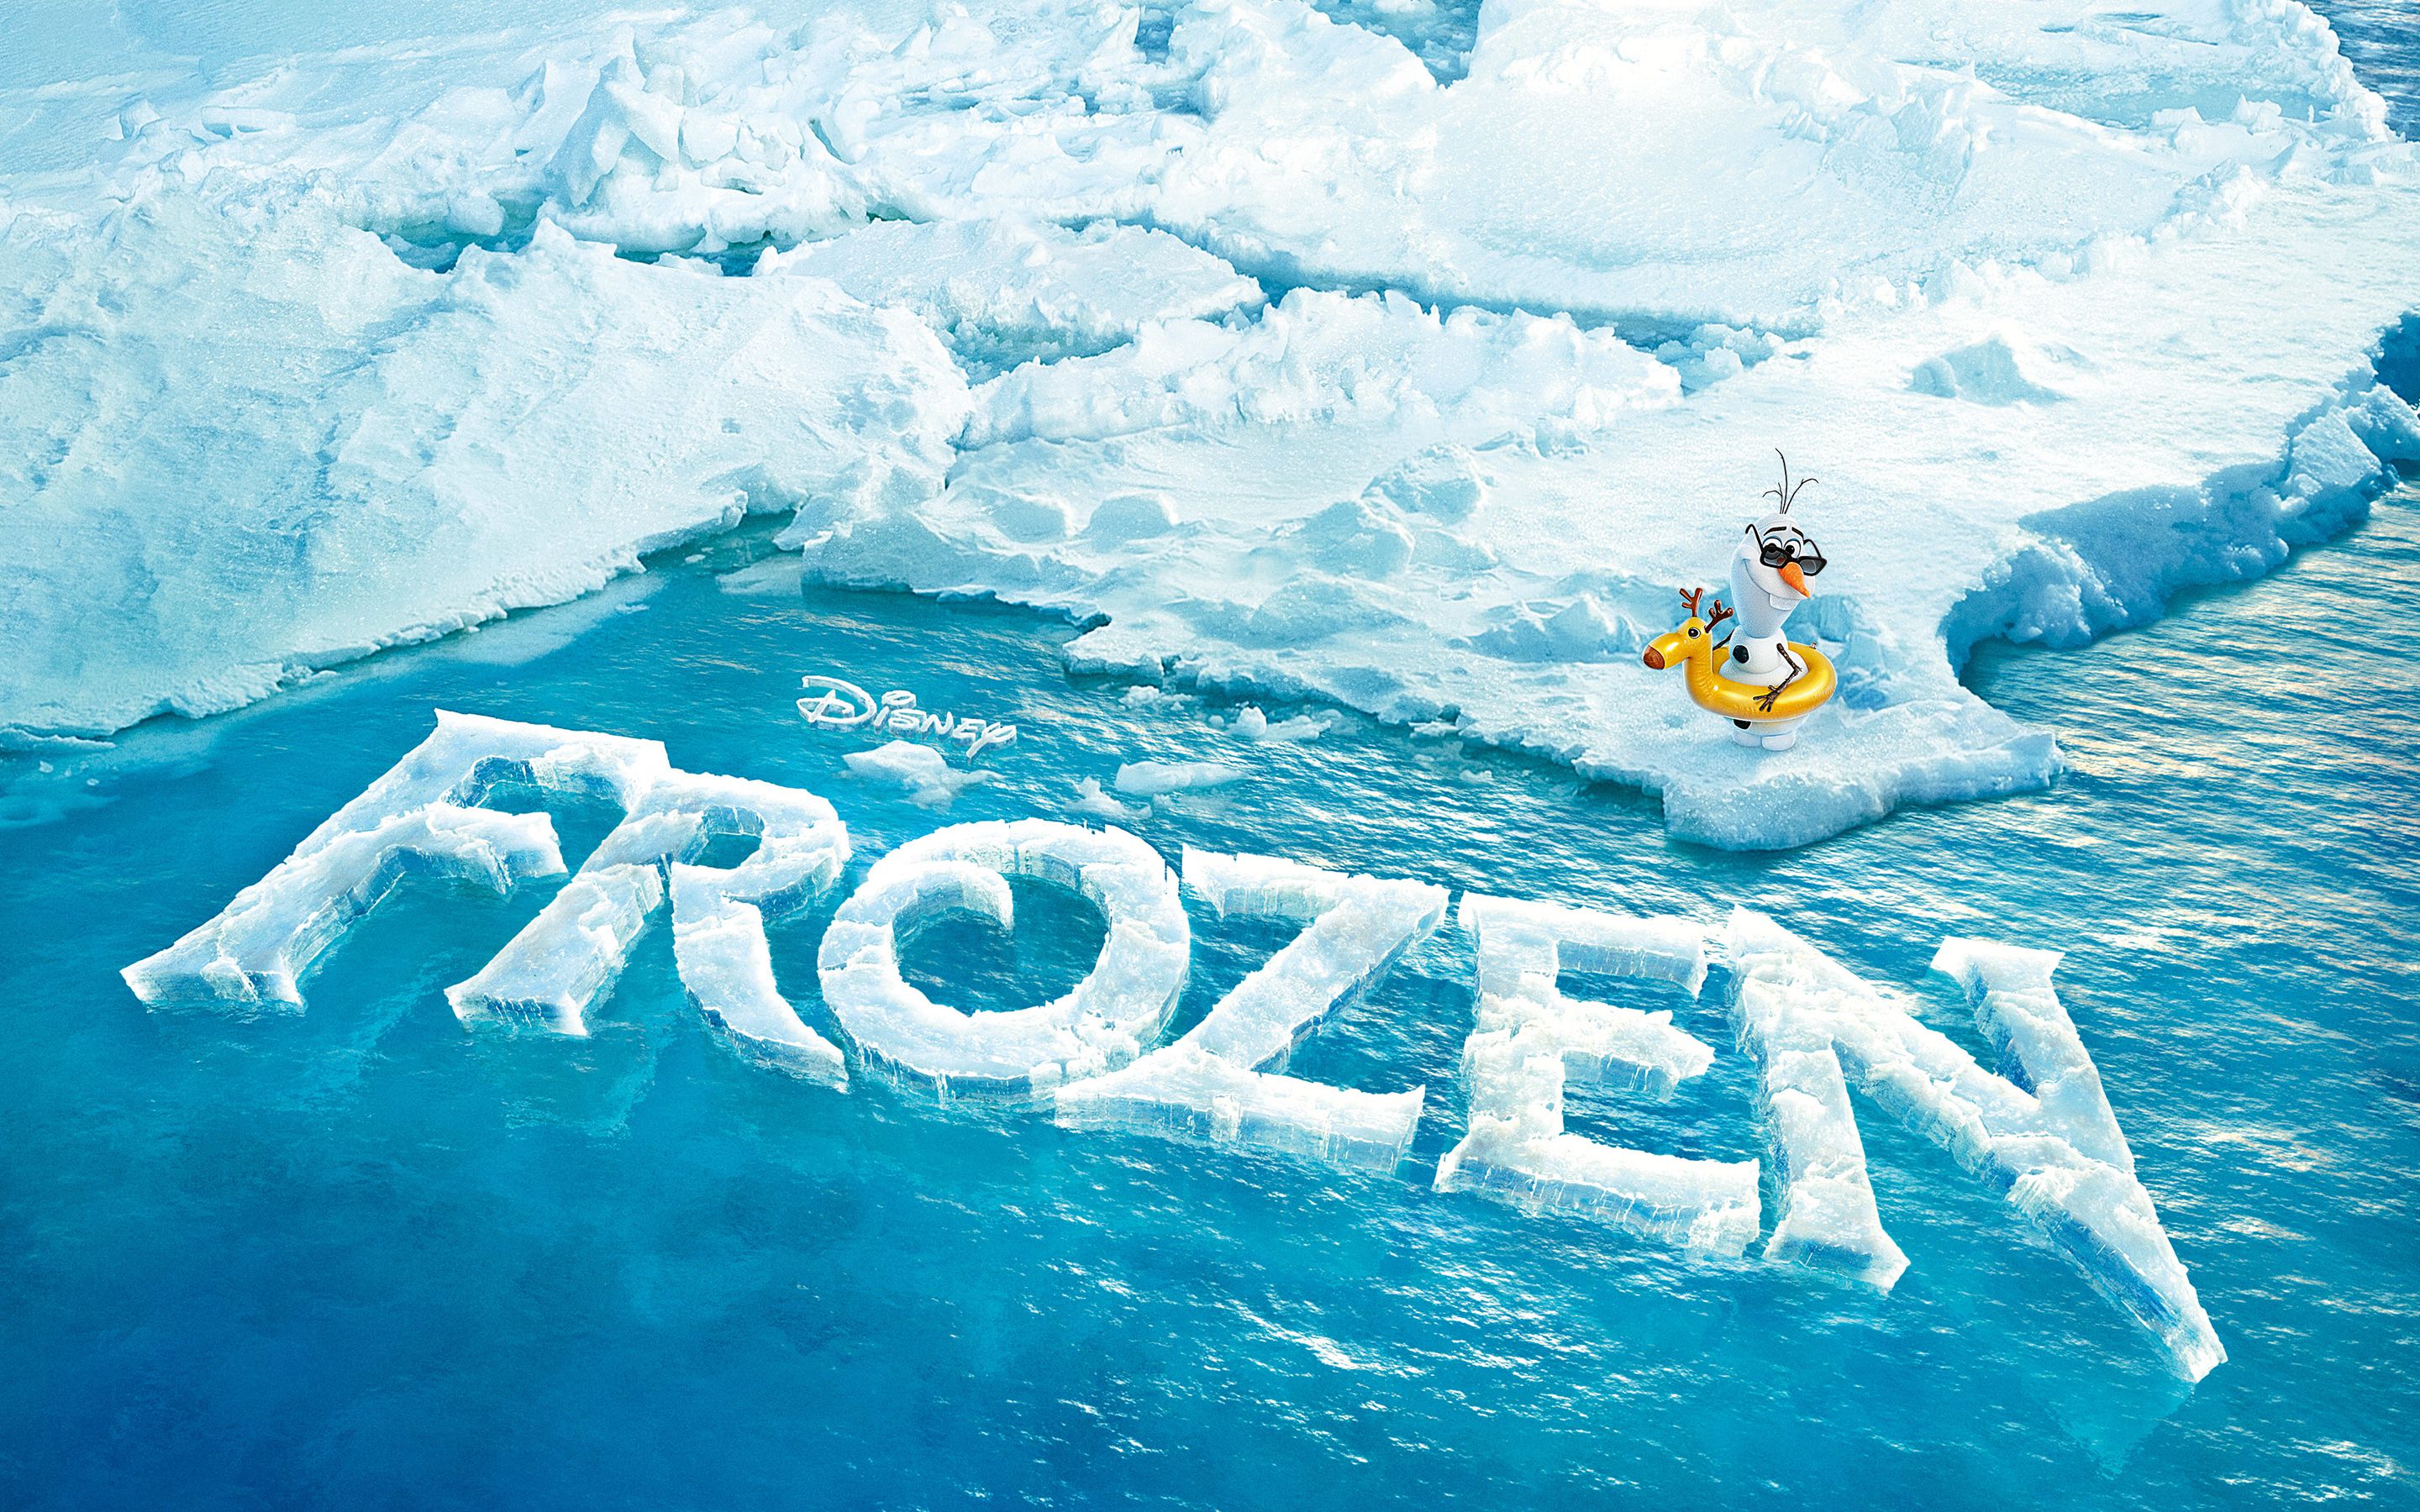 Download Frozen Full Hd Wallpapers Facebook Timeline Covers Cgfrog Mobile